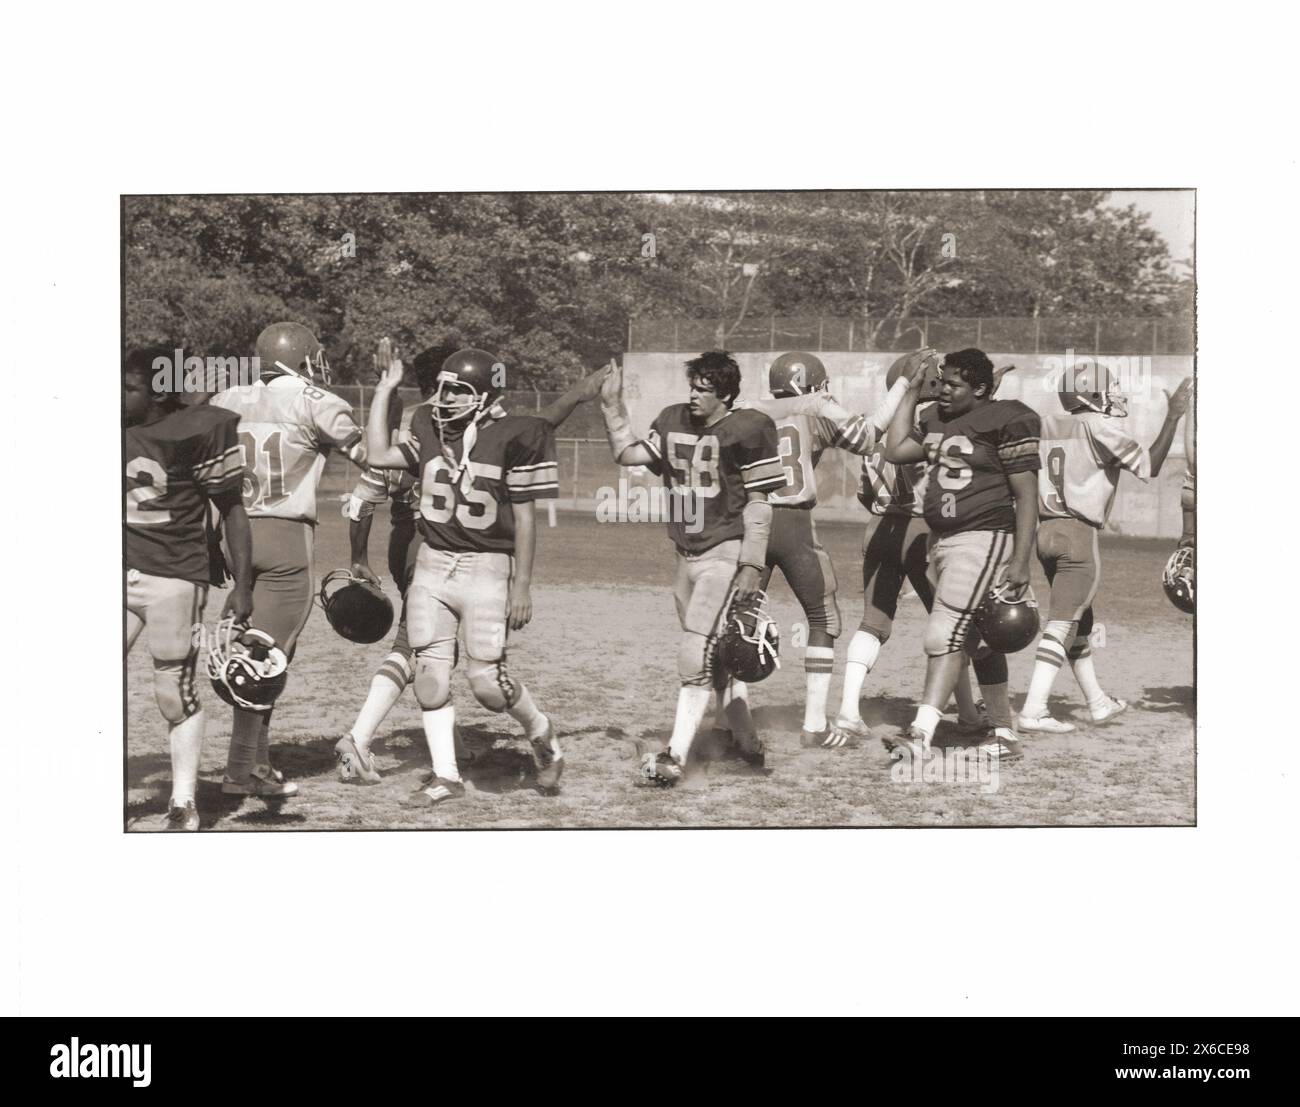 SPORTSMANSHIP. After a 1982 high school football game, participating players high five with opposing players. At Midwood Field in Brooklyn, New York. Stock Photo